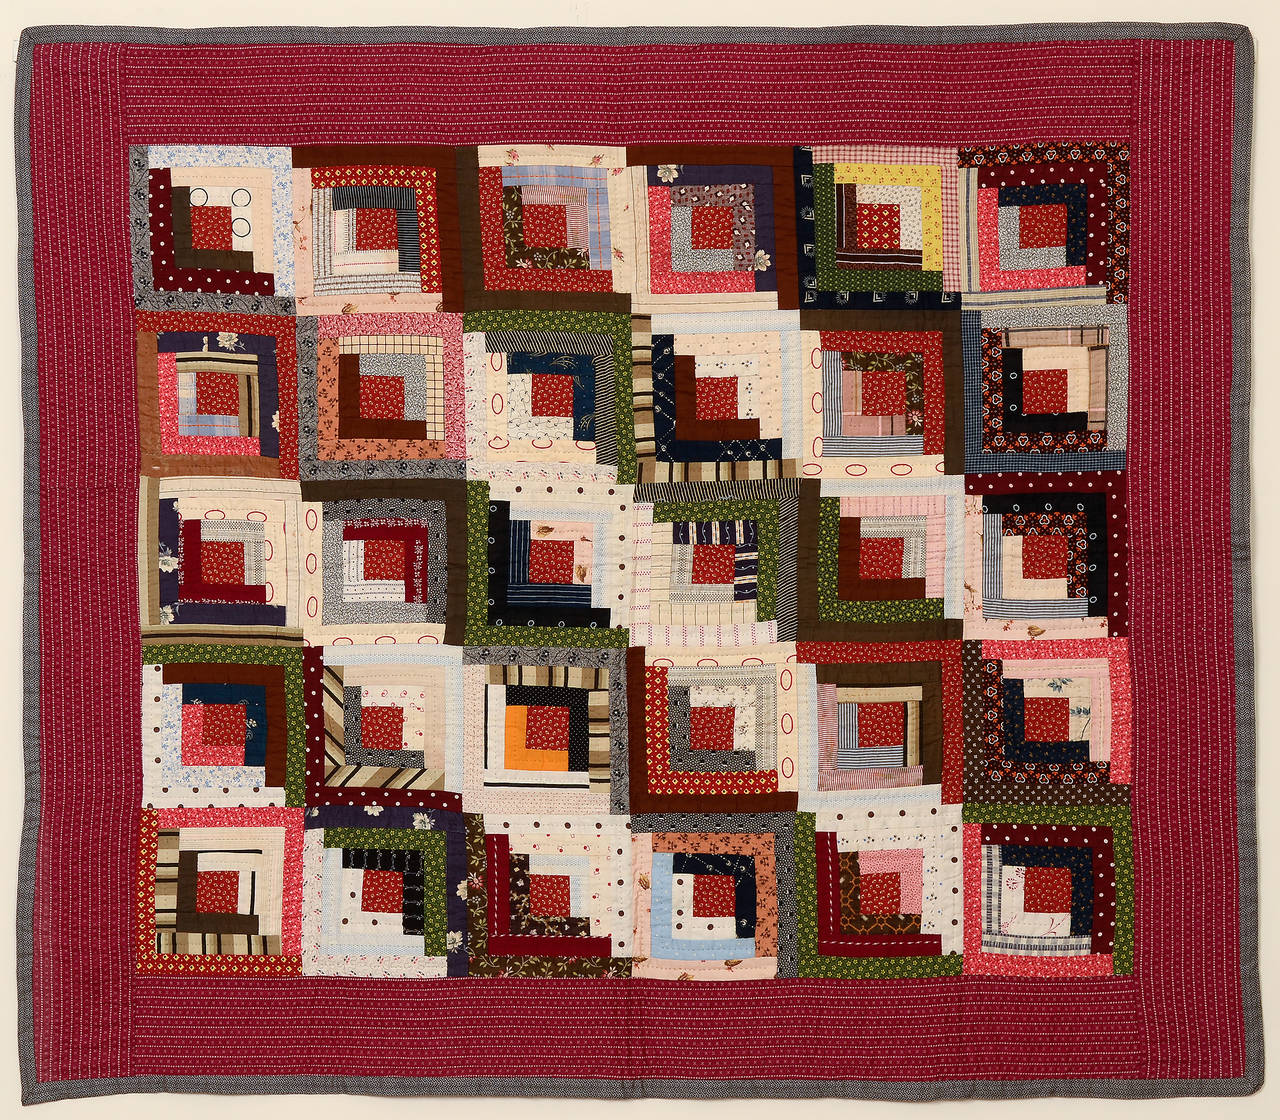 Rarely does one see a crib quilt as a scaled down version of a straight furrows log cabin. This fine example is in pristine, un-used condition. The back is a bars pattern often seen in the quilts of Southeast Pennsylvania. Measurements are 40 1/2